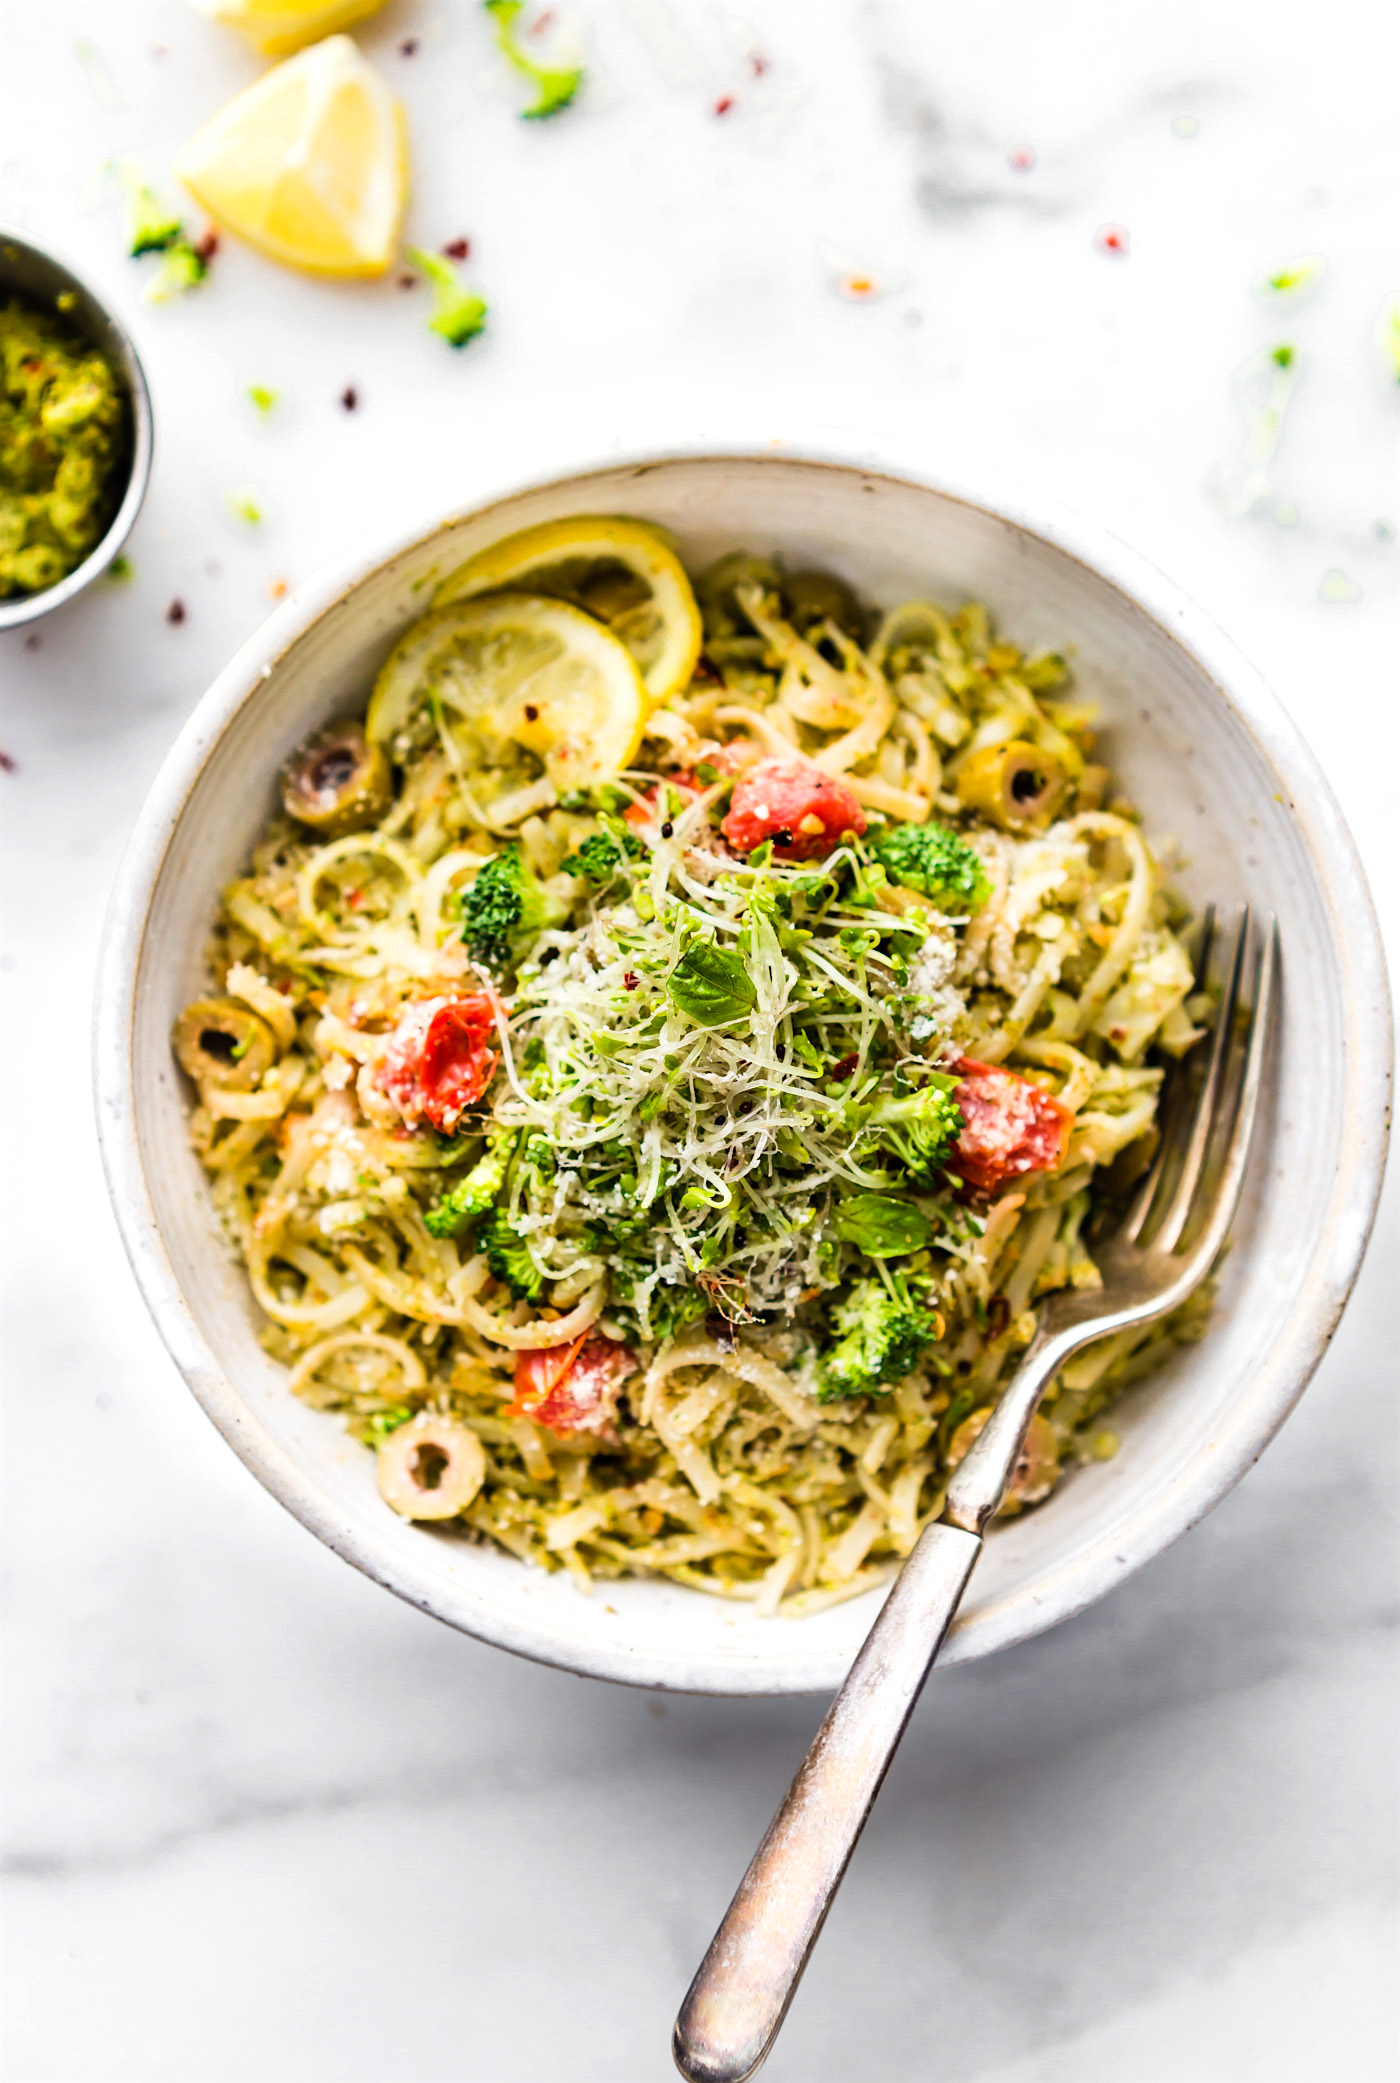 This gluten free Peppery Broccoli Arugula Pesto Pasta is gonna rock your world! A pesto pasta with broccoli and arugula and packed with nutrition and flavor! An easy pasta dinner for a quick weeknight dinner or healthy lunch! Ready in under 30 minutes and vegan friendly option. www.cottercrunch.com